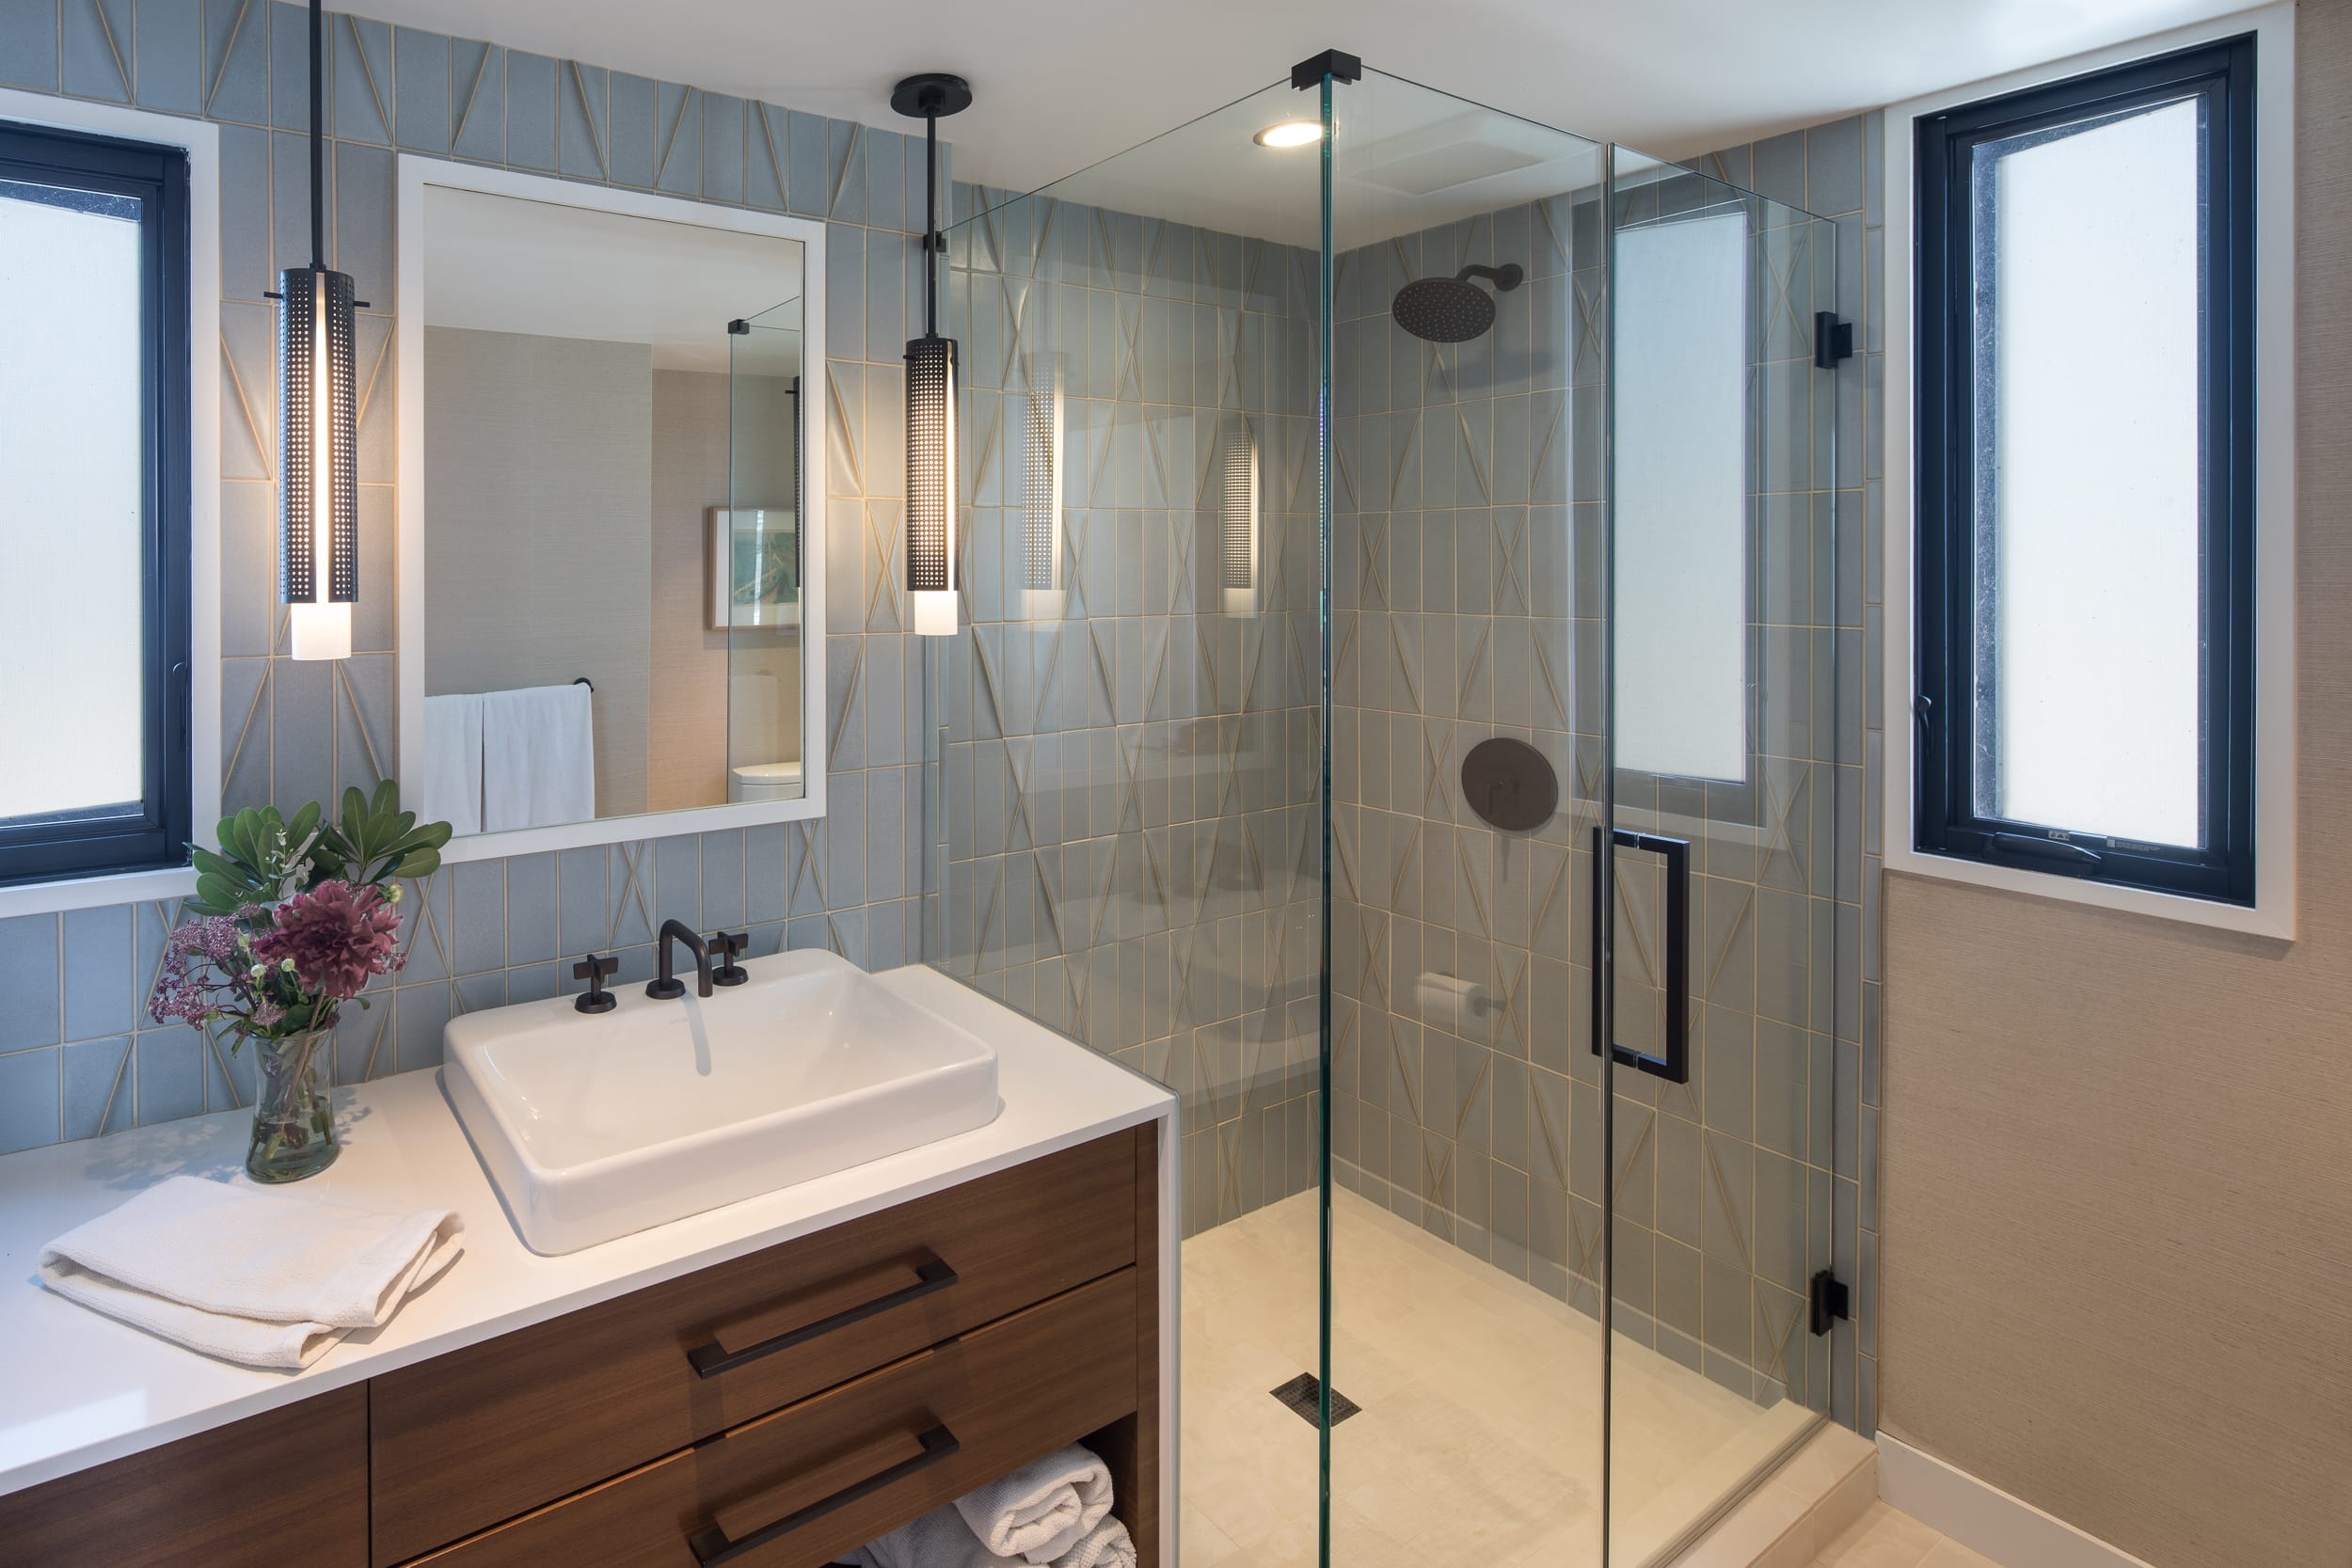 A modern home bathroom featuring a glass shower stall and sink.